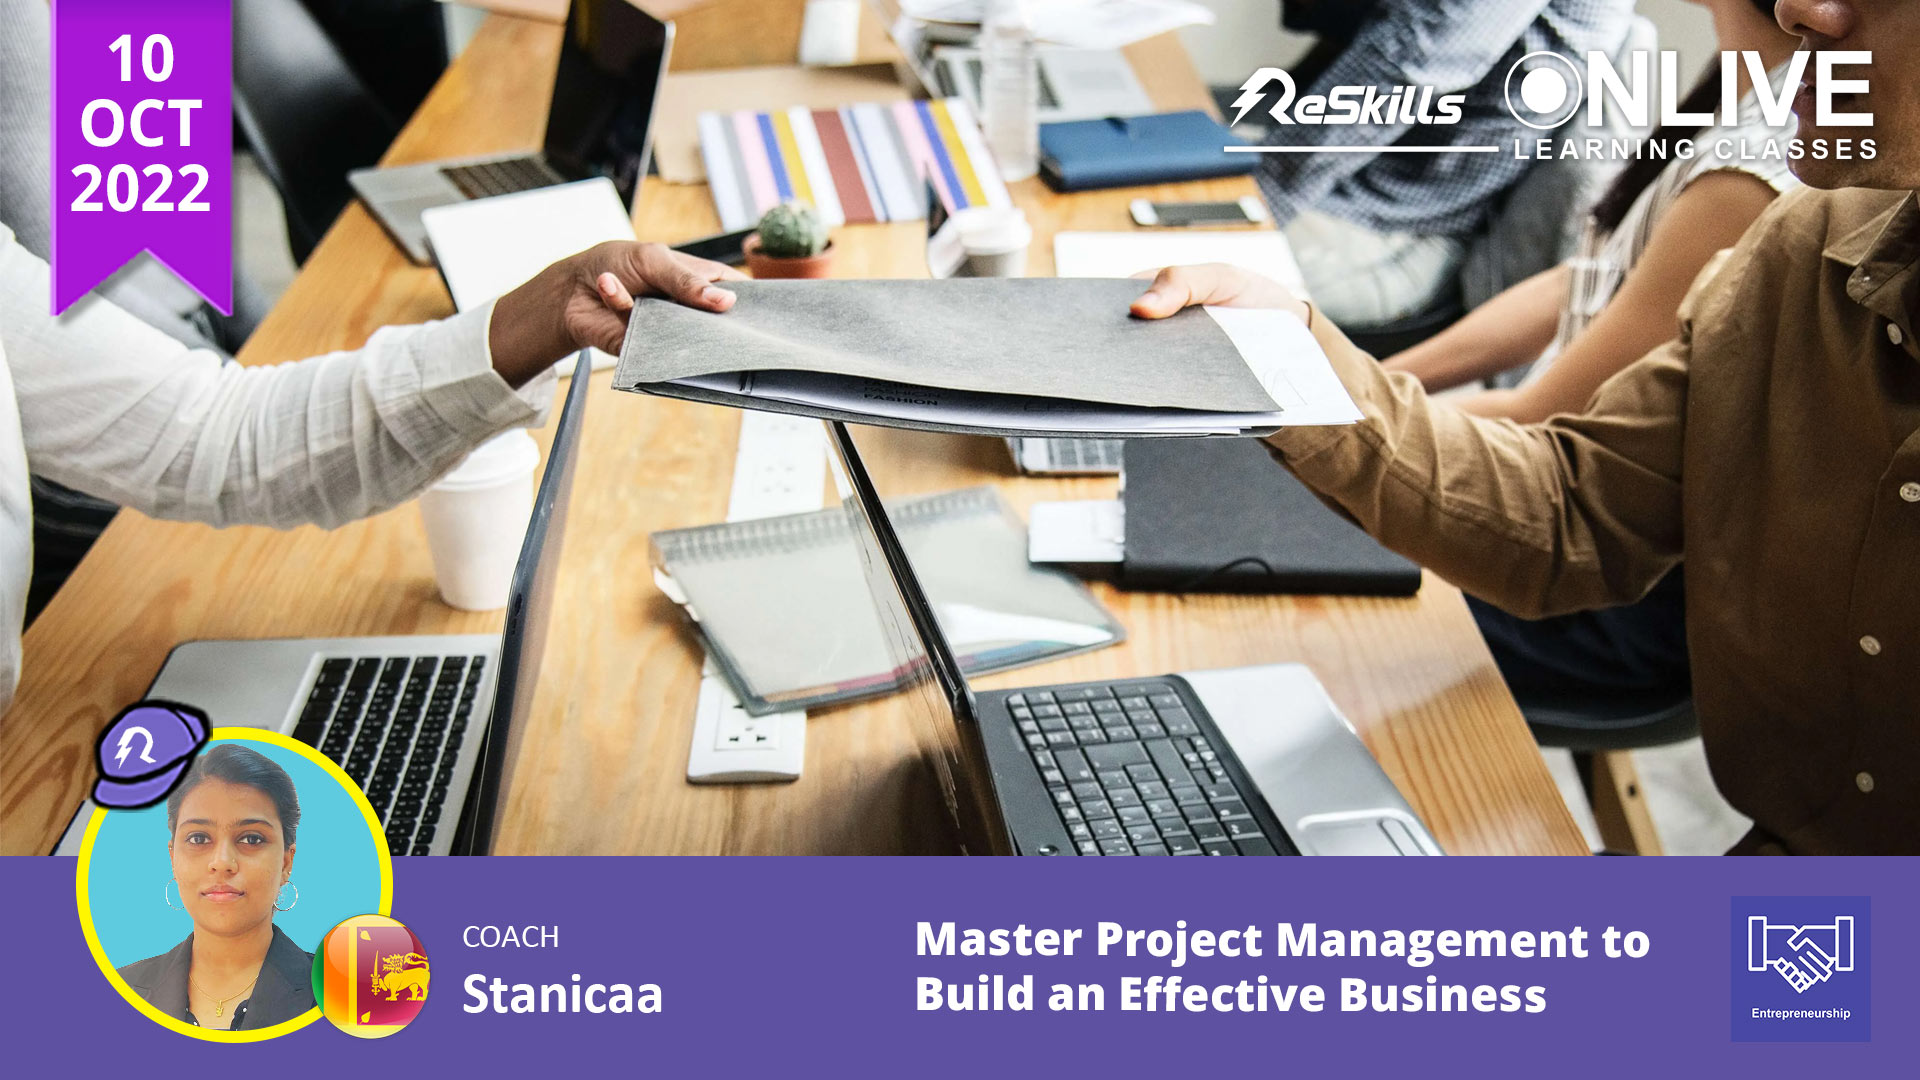 Master Project Management to Build an Effective Business | ReSkills